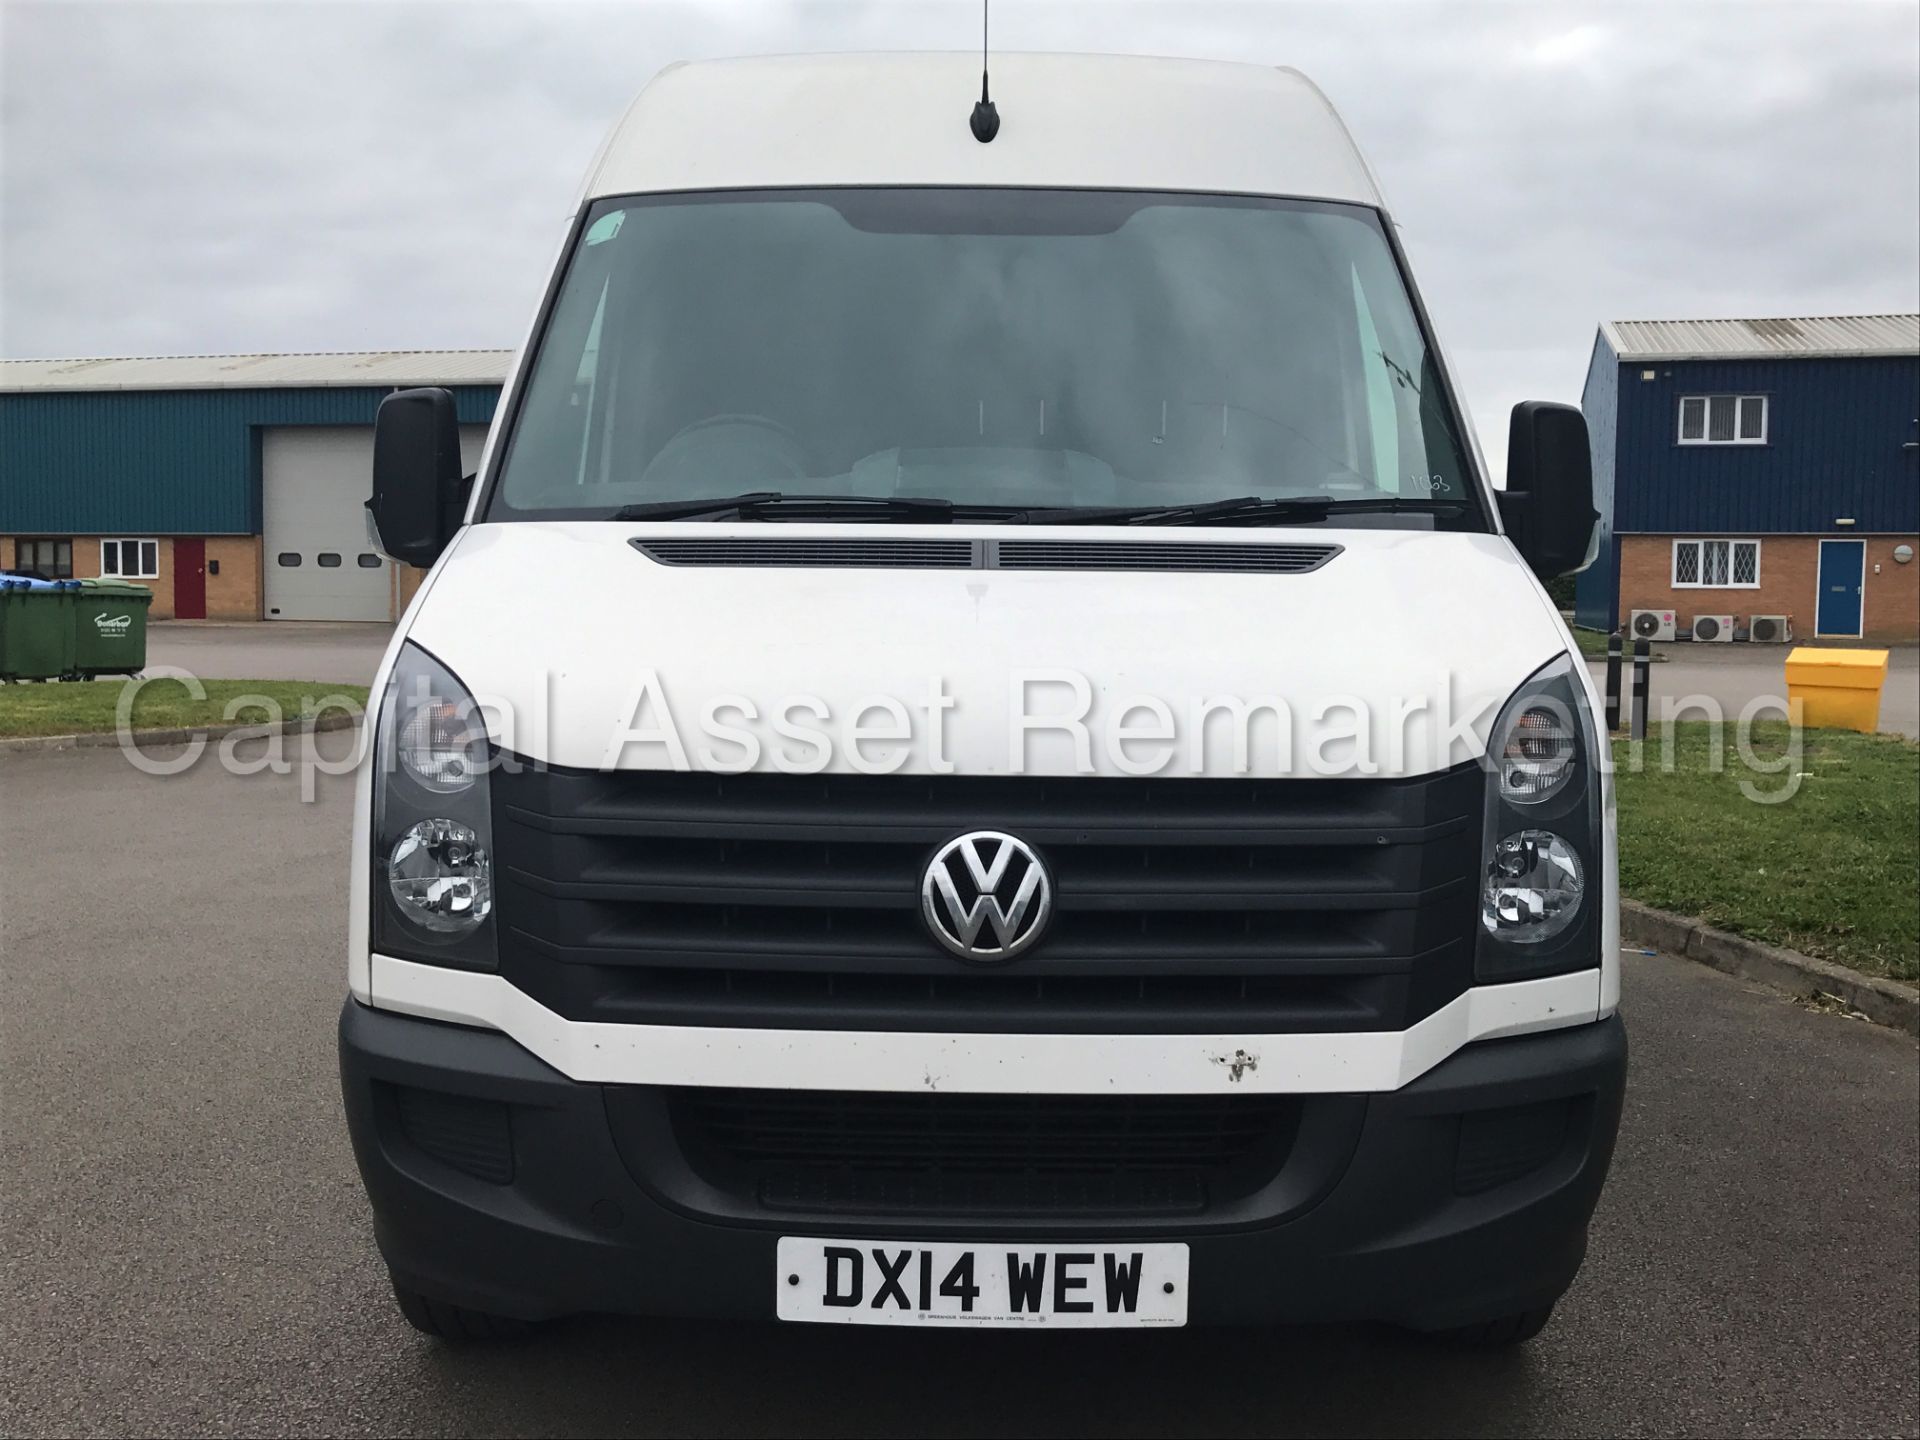 VOLKSWAGEN CRAFTER CR35 'MWB HI-ROOF' (2014) '2.0 TDI - 109 PS - 6 SPEED' *1 COMPANY OWNER FROM NEW* - Image 3 of 19